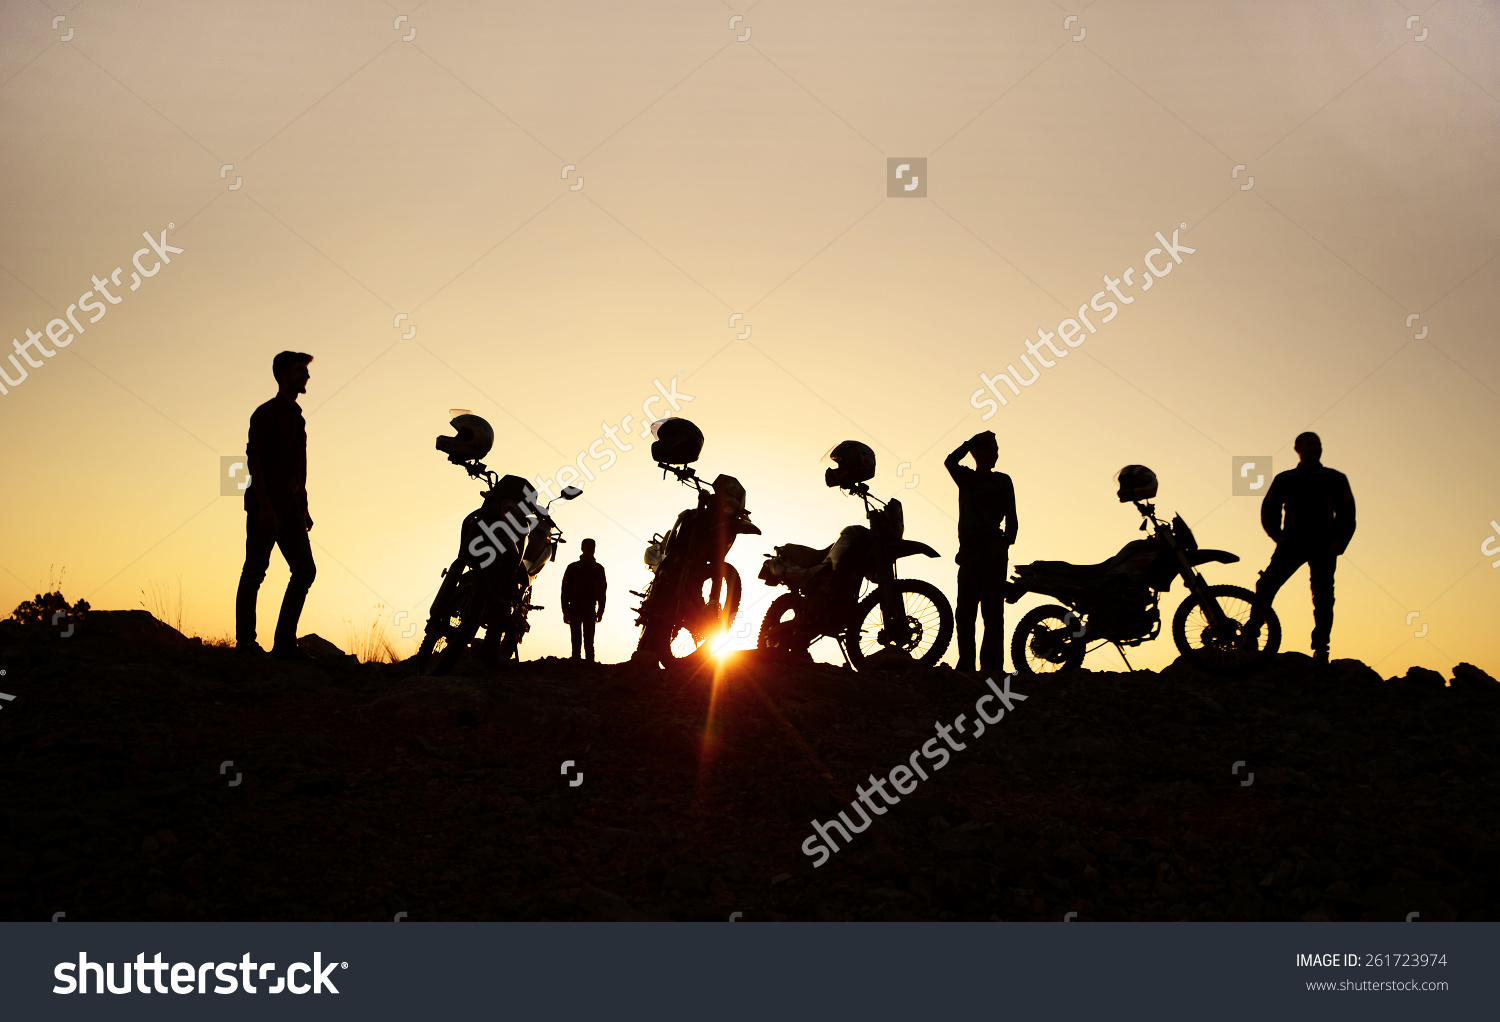 stock-photo-motorcycle-team-silhouette-261723974